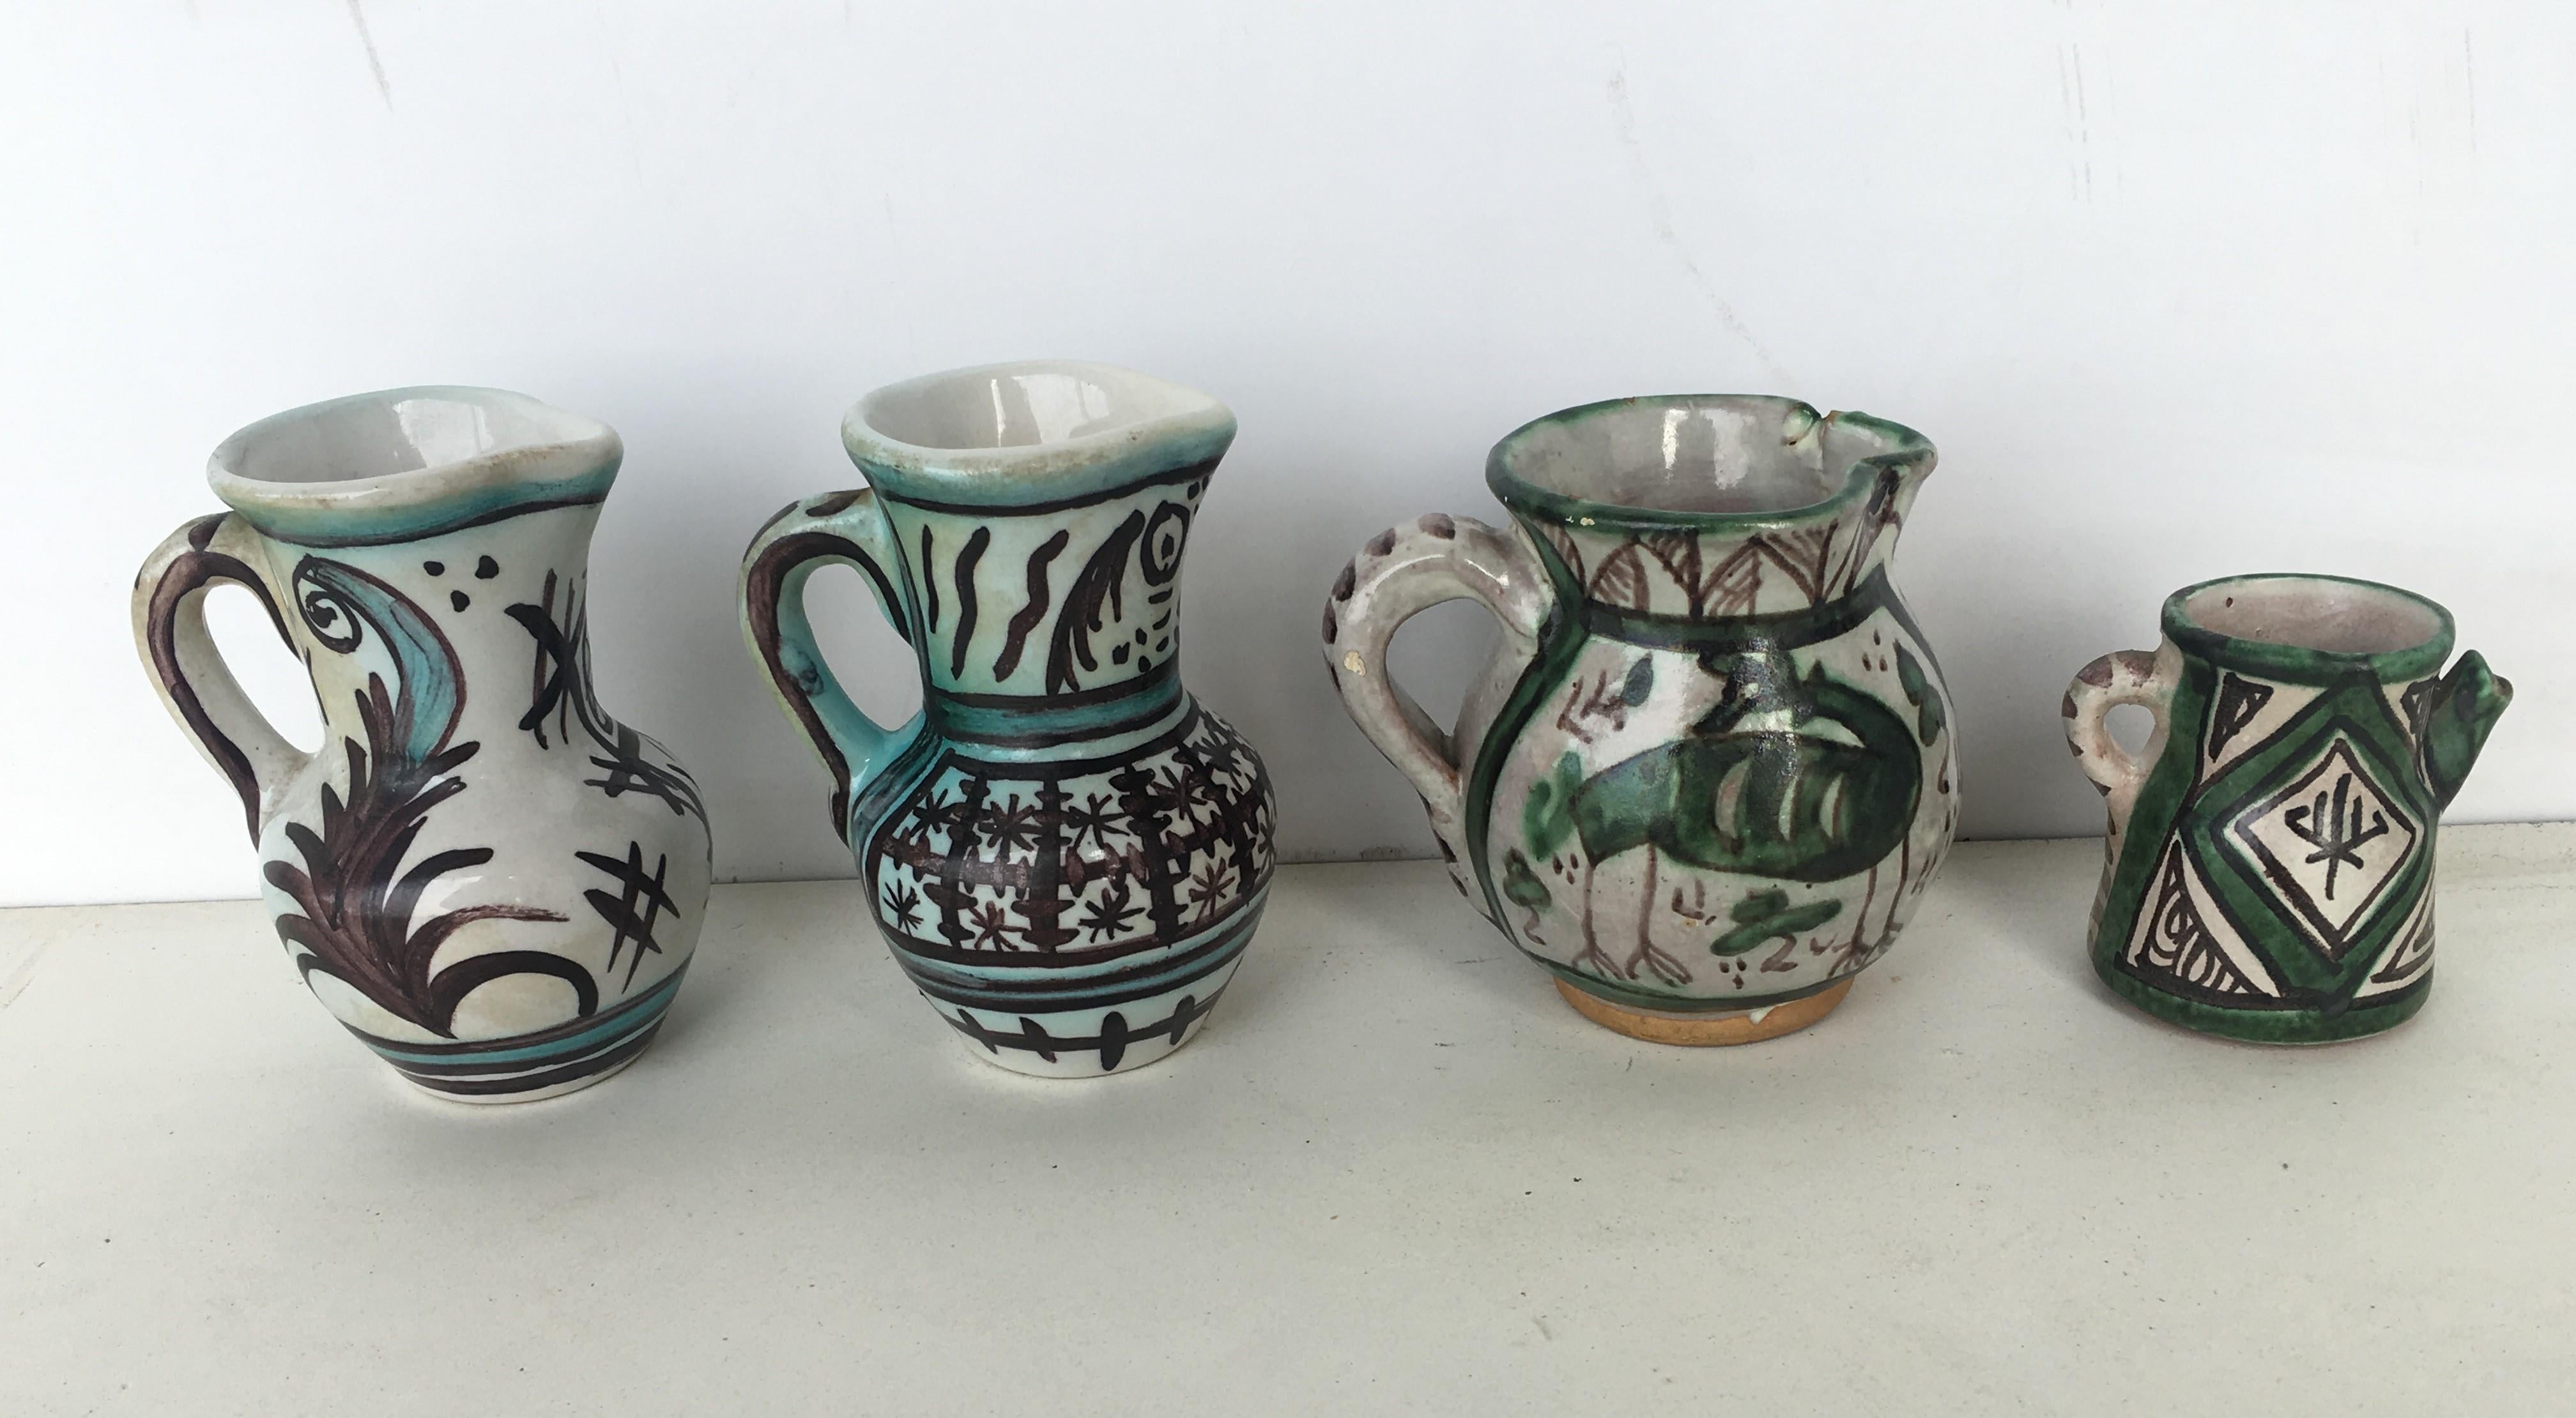 Country 19th Century Set of Four Glazed Terracotta Vases, Urns Pitchers in Green & White